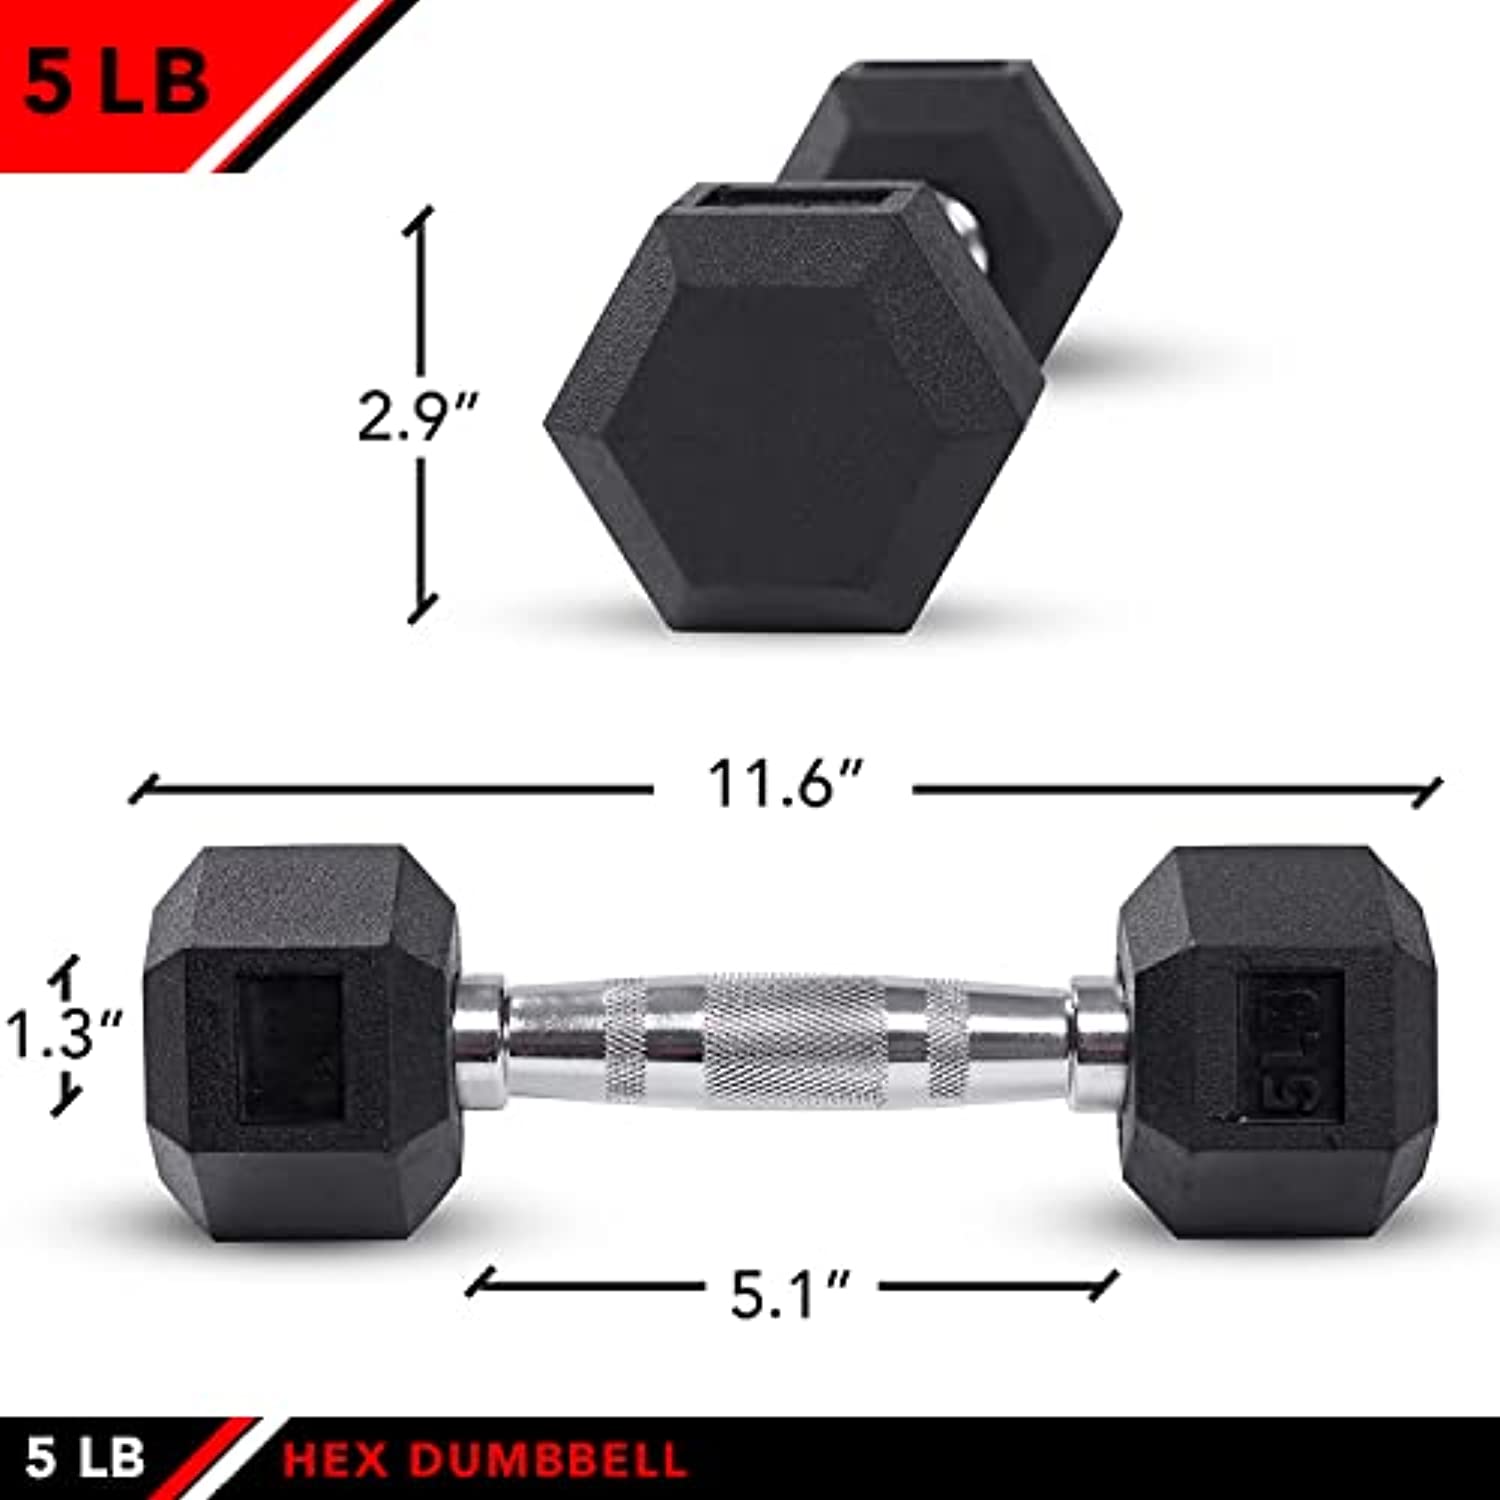 JFIT Rubber Hex Dumbbell 5 LB Single - Hex Shaped Heads to Prevent Rolling and Injury - Ergonomic Hand Weights for Exercise, Therapy, Building Muscle, Strength and Weight Training